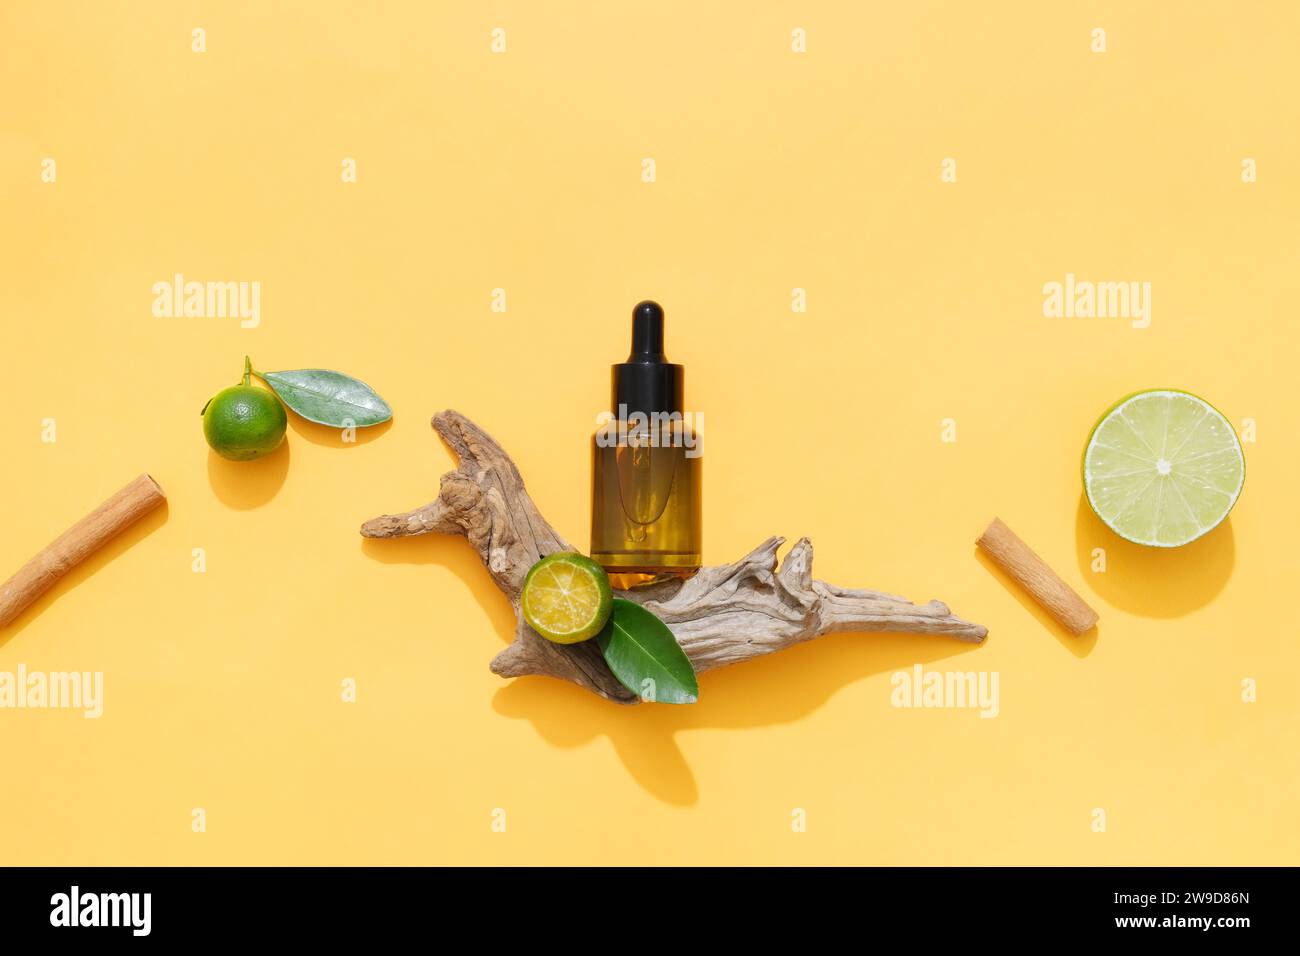 An amber serum bottle displayed on orange background with some natural ingredients: lime, kumquat and cinnamon stick. Their essential oils help improv Stock Photo